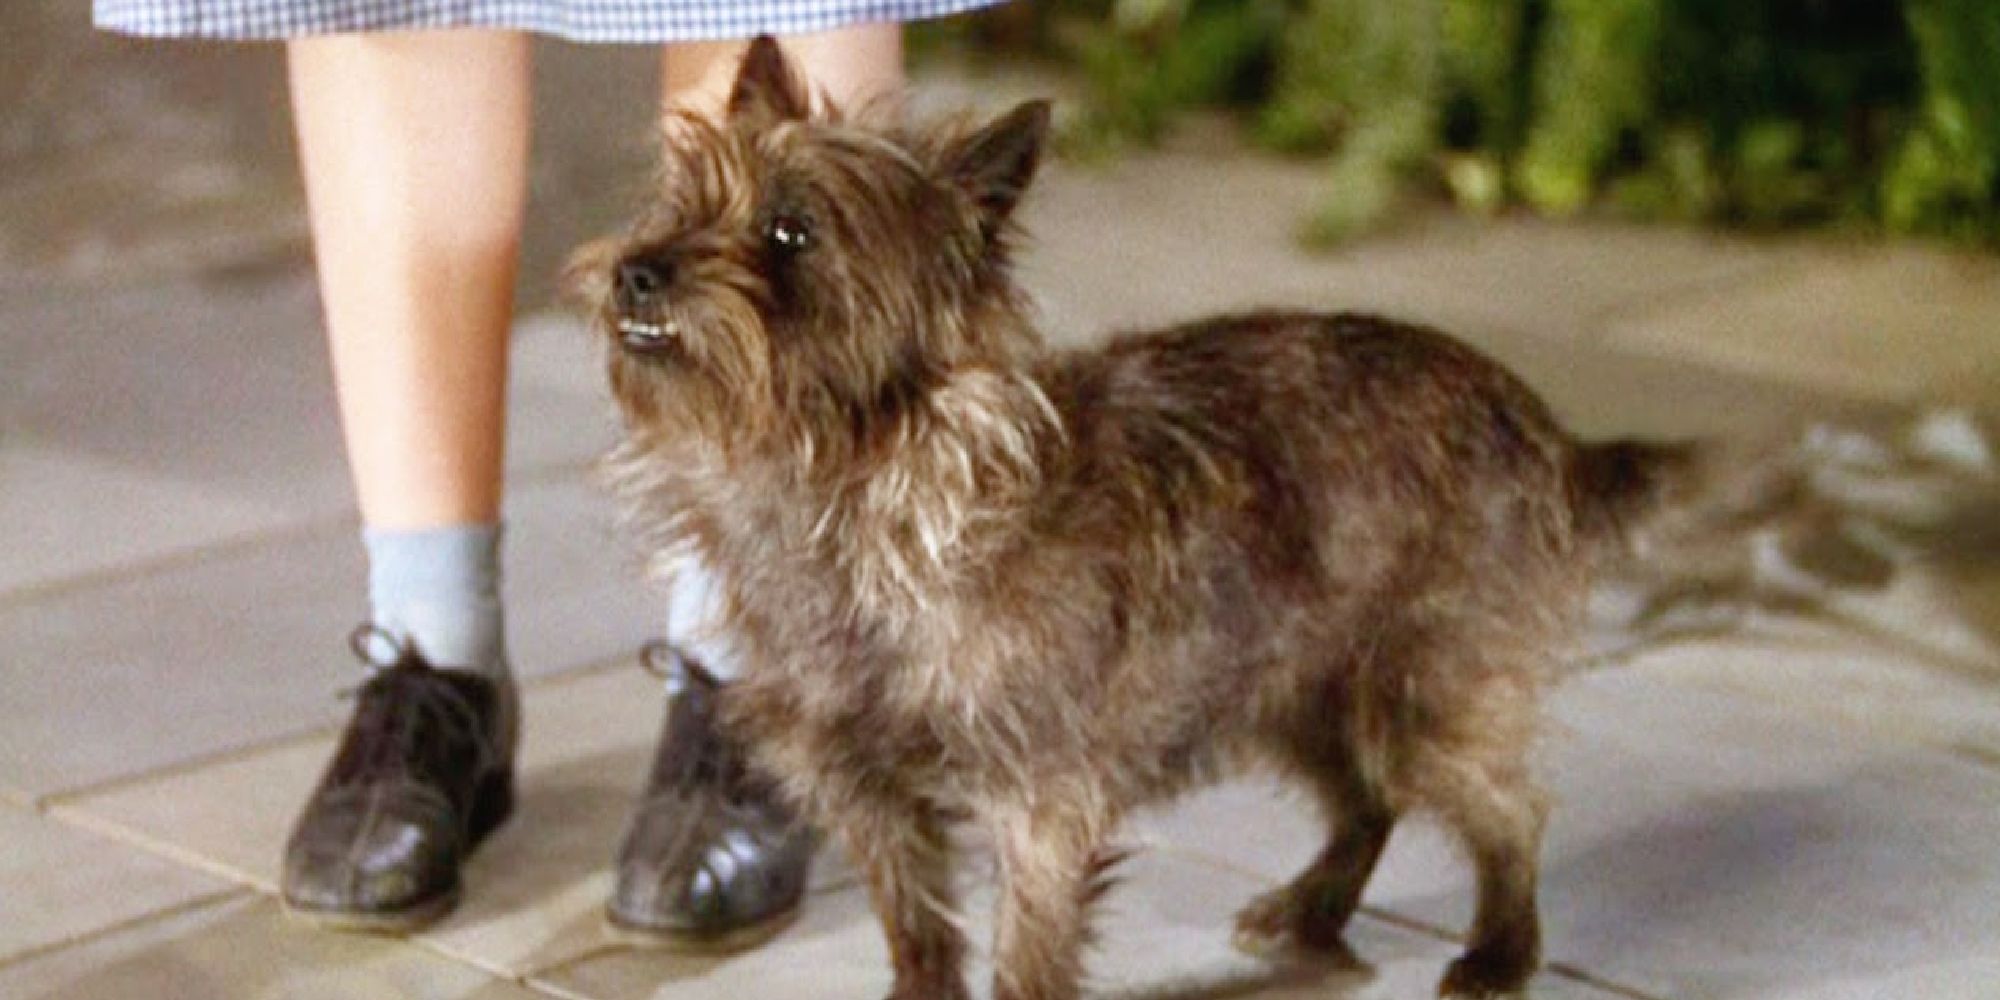 Toto in Wizard of Oz